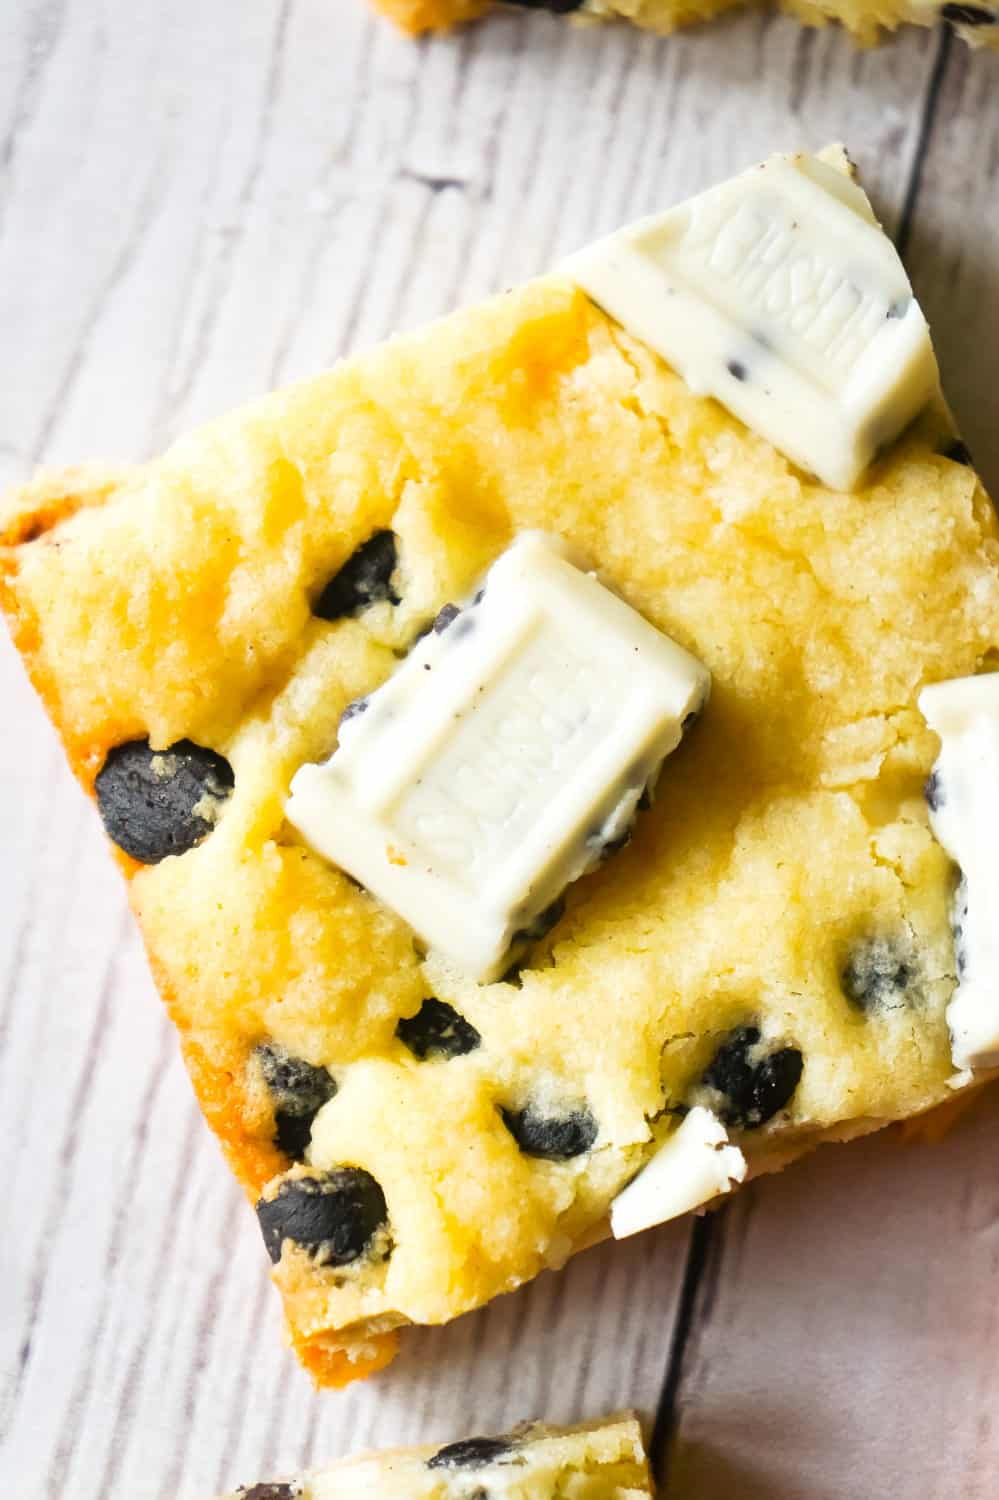 Cookies and Cream Sugar Cookie Bars are chewy sugar cookies made with vanilla pudding mix and loaded with Hershey's Cookies 'n' Creme baking bits and snack size Hershey's Cookies 'n' Creme bars.